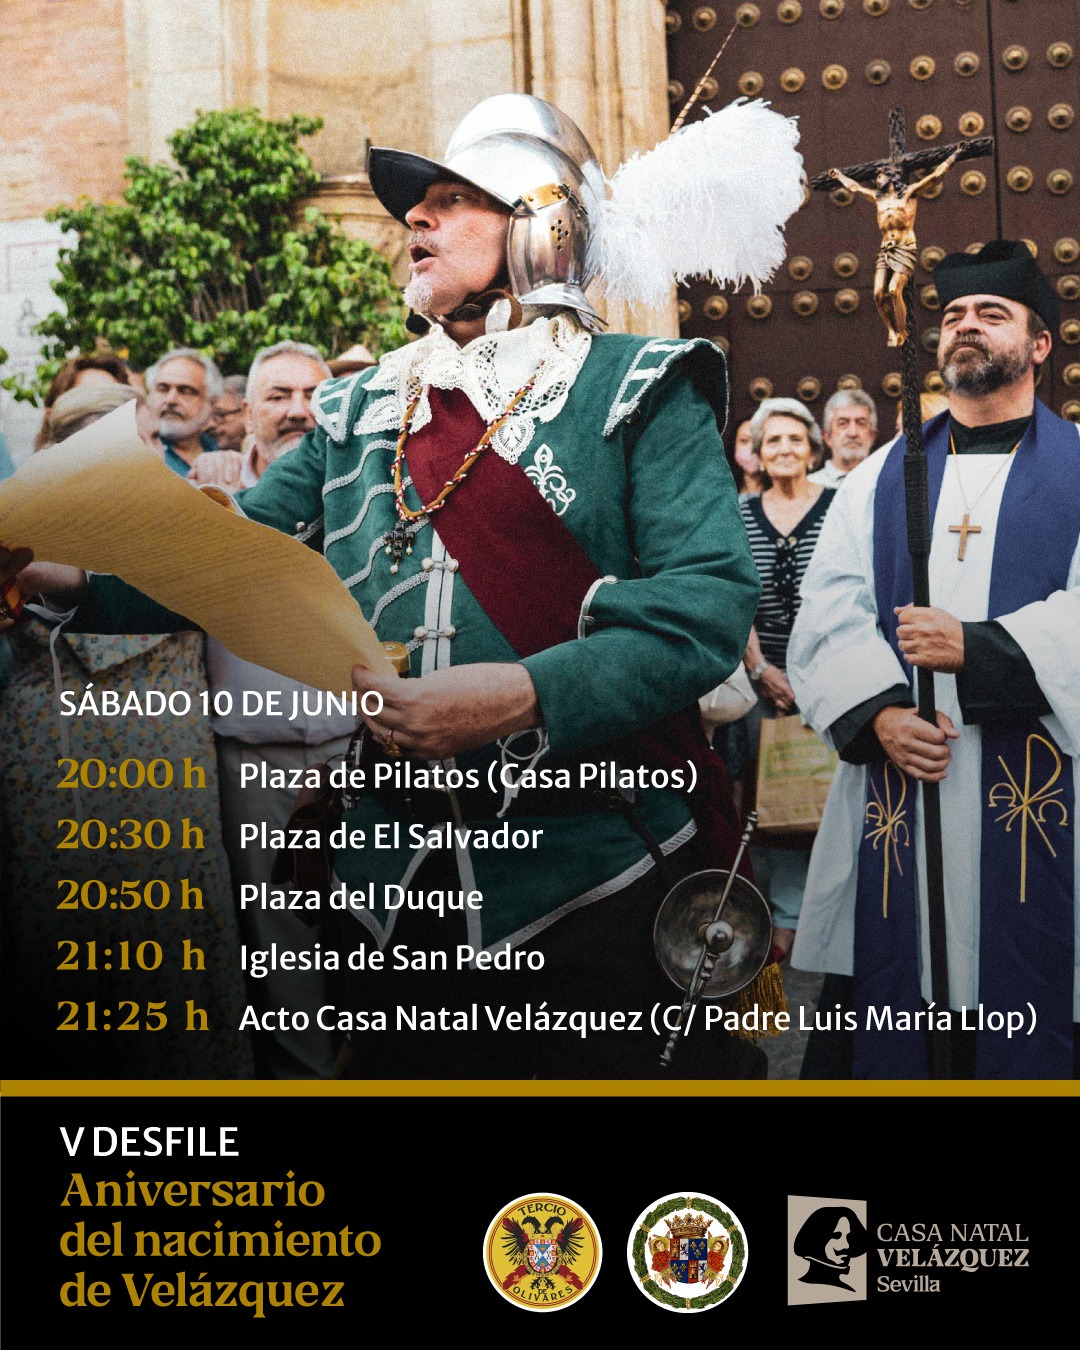 Parade commemorating the 424th anniversary of Velázquez's birth